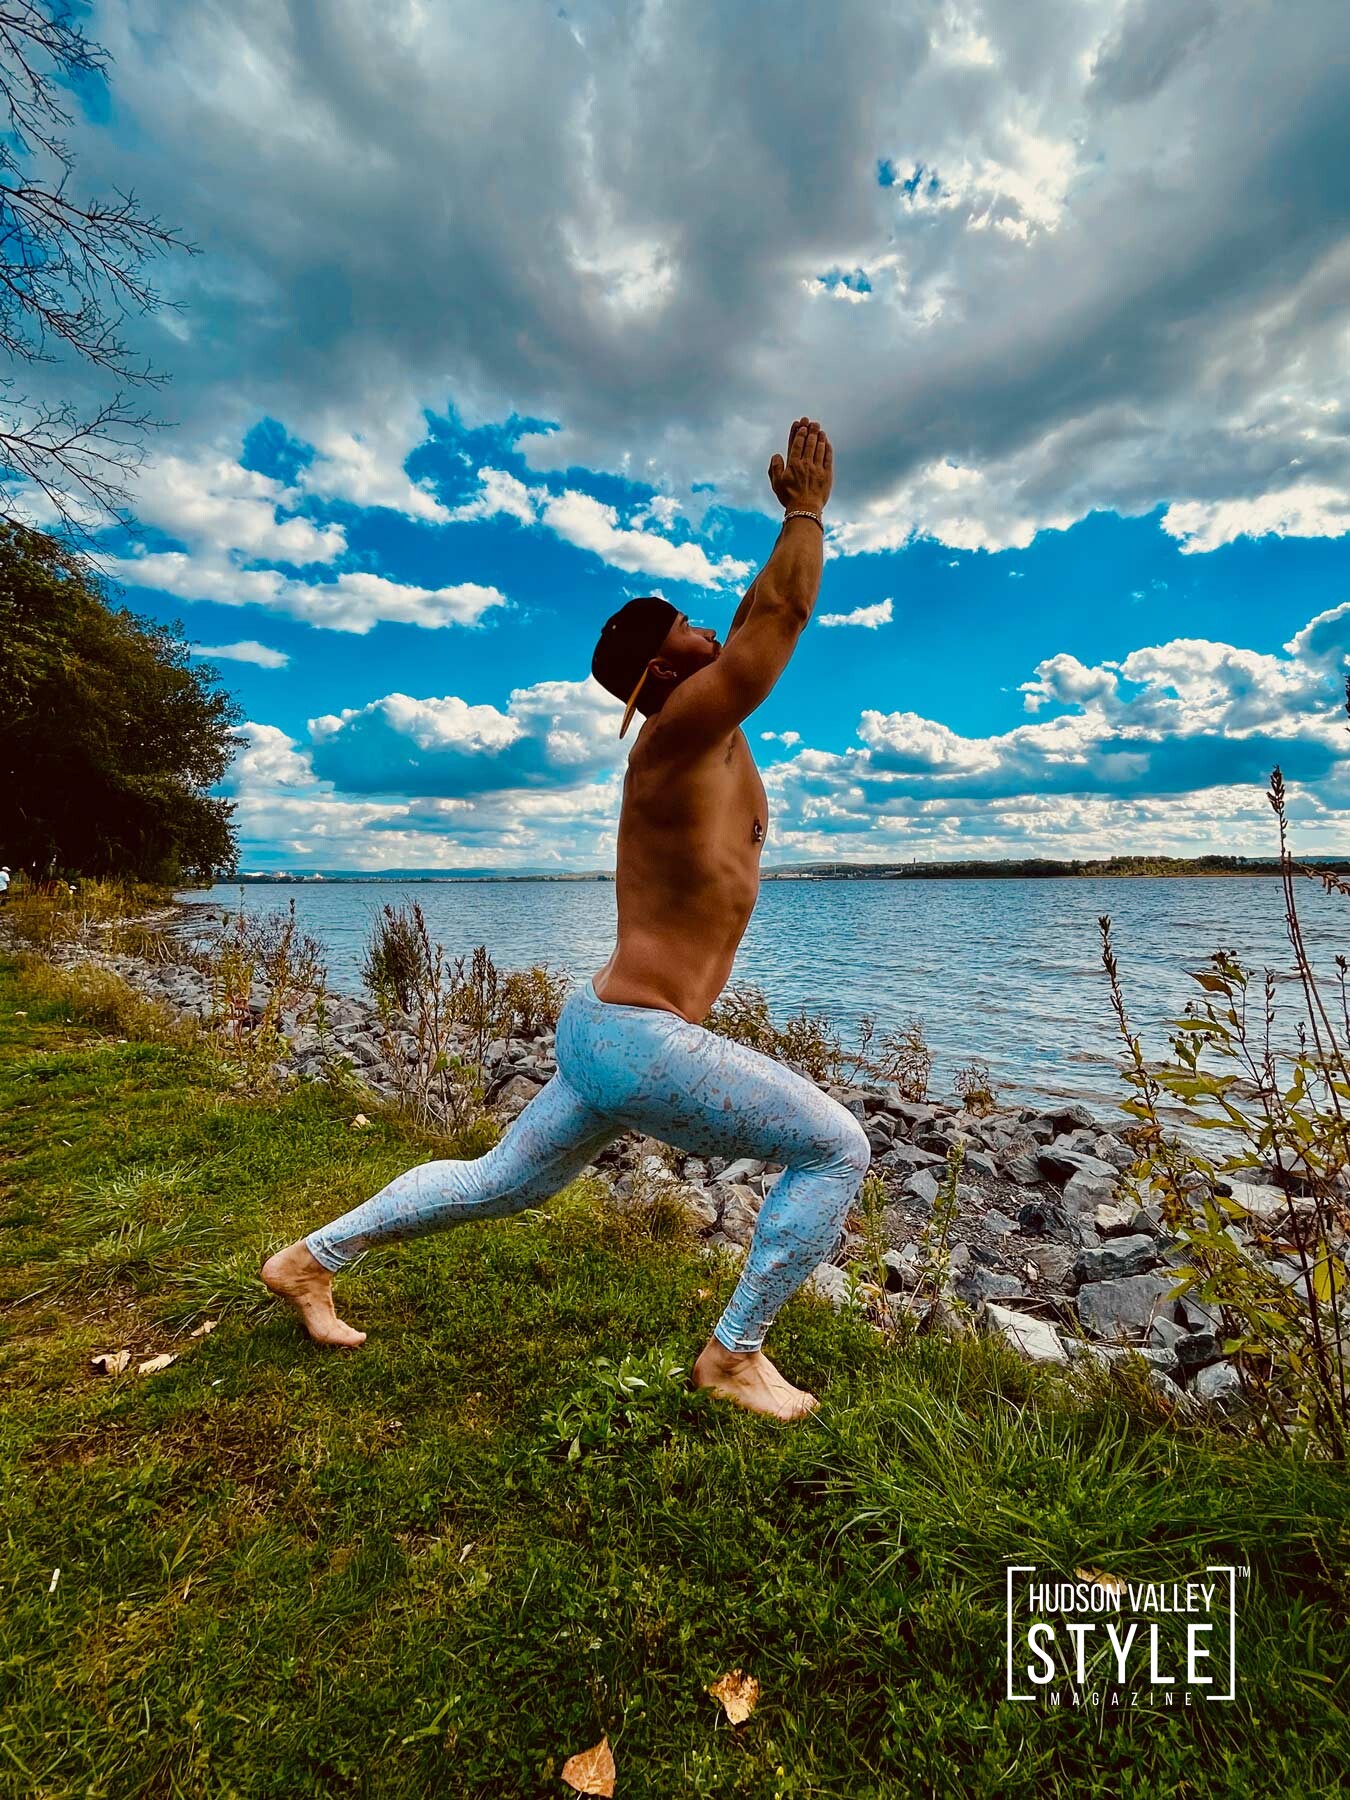 Here is What Yoga Practice Can Do For You – Yoga 101 with Maxwell Alexander